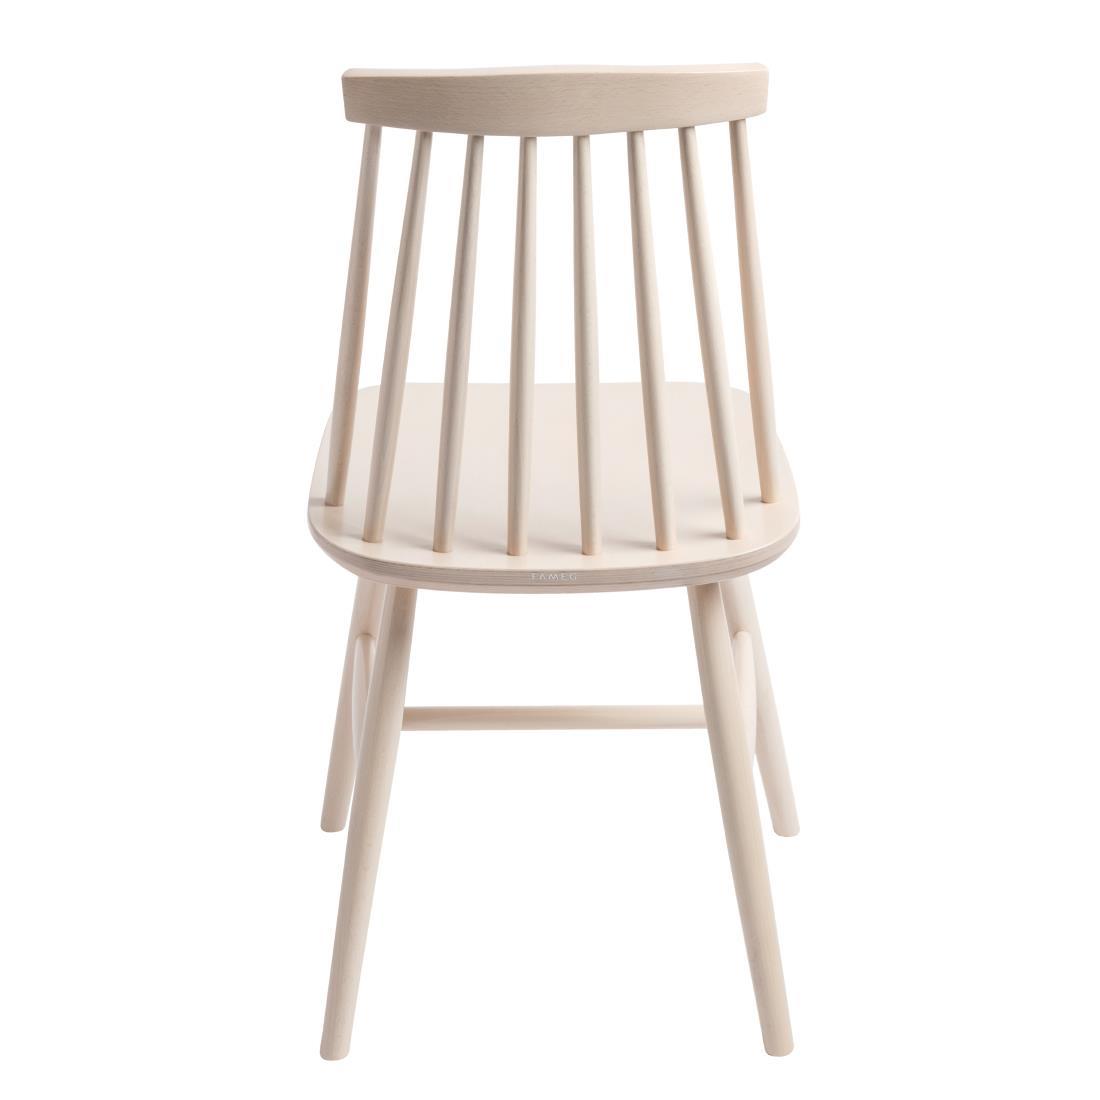 Fameg Farmhouse Angled Side Chairs White (Pack of 2) - DC354  - 4